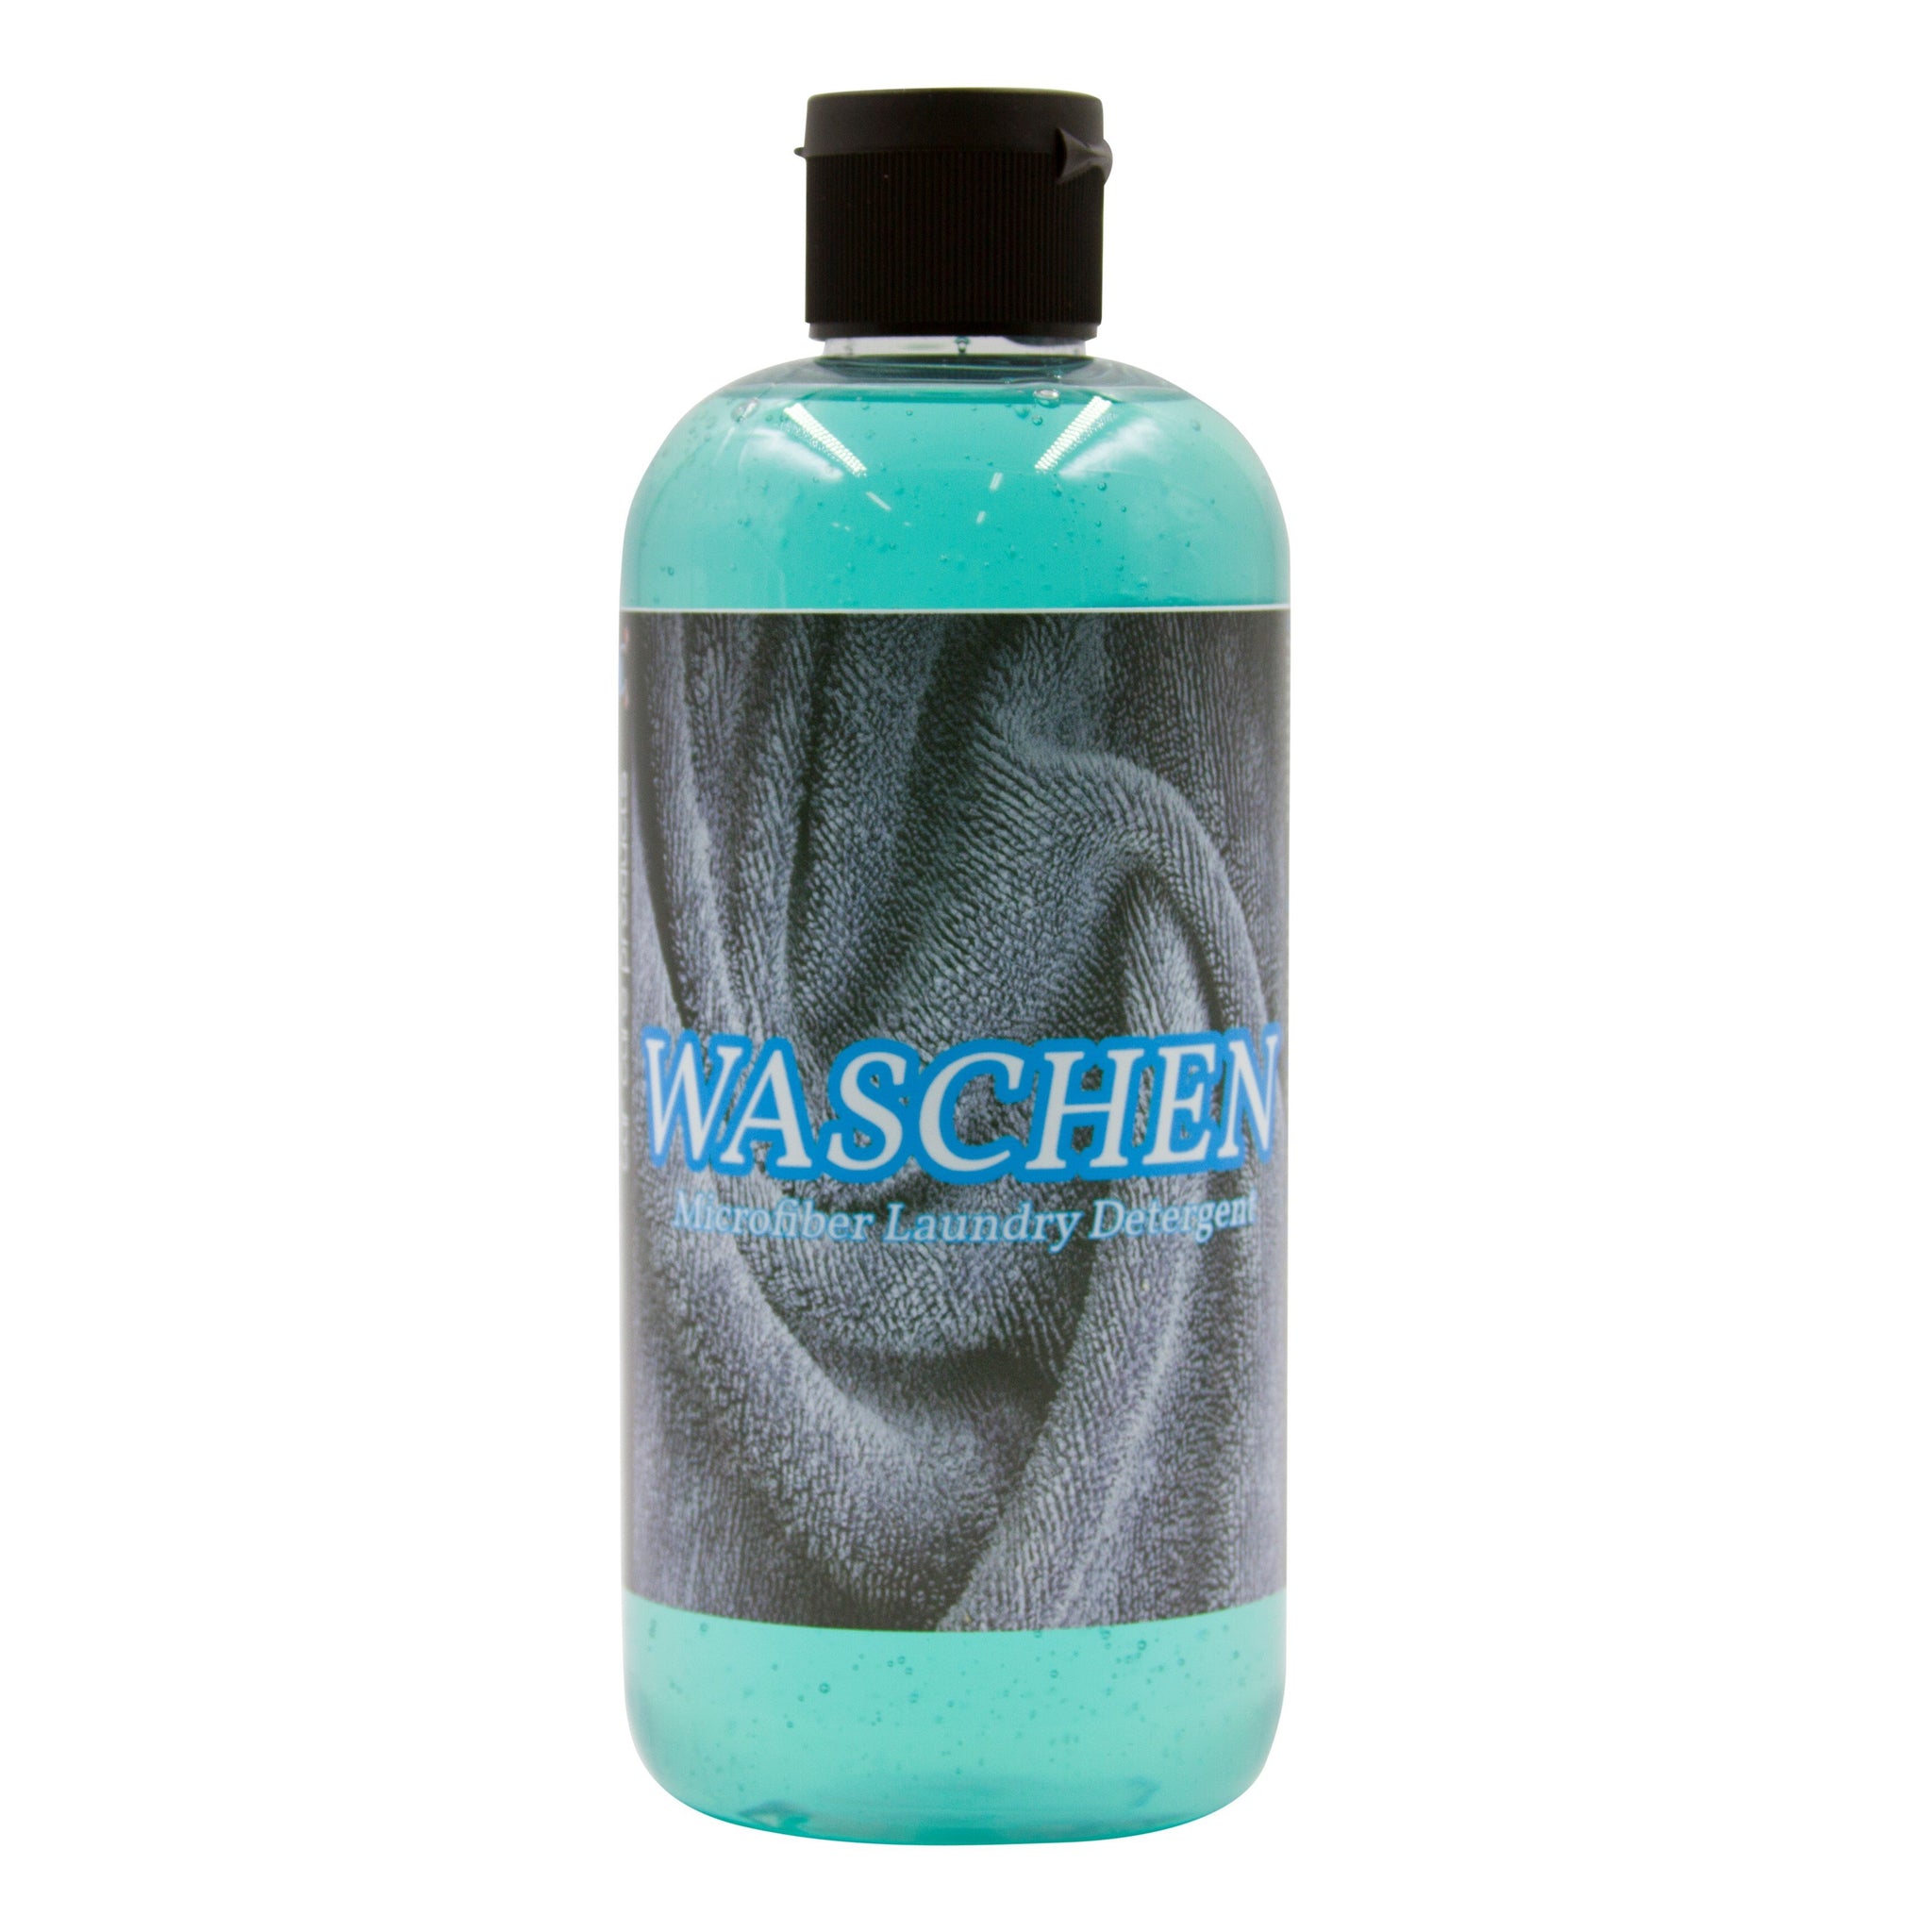 Greenway’s Waschen Microfiber Laundry Detergent, safe for all machines, biodegradable, optic brighteners, 16 ounces.